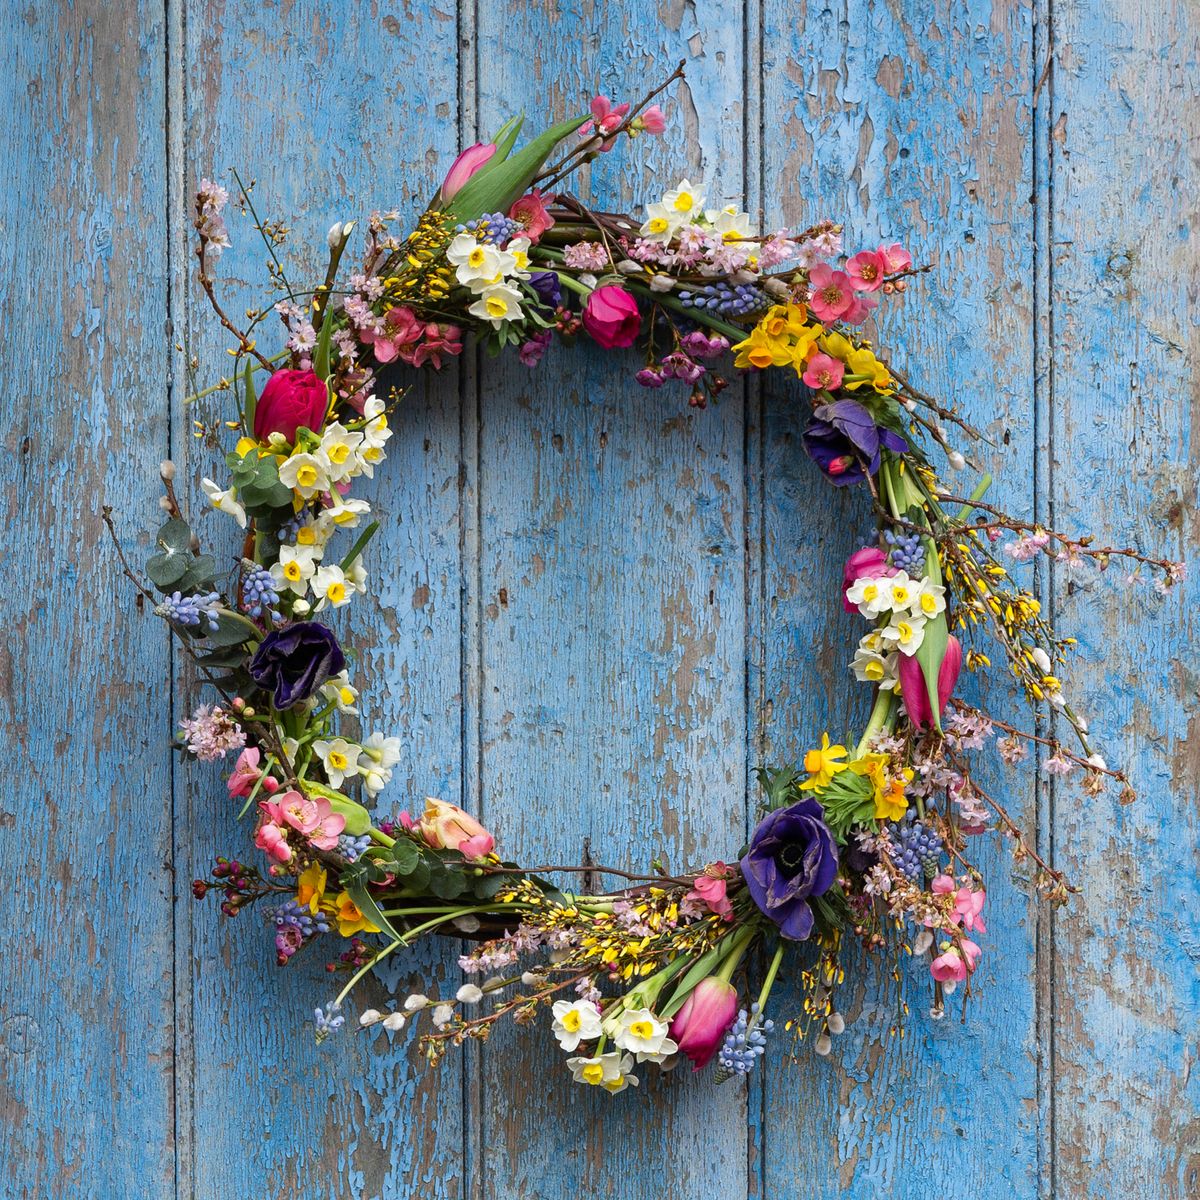 Celebrate Spring and Make a Heart Wreath - A Crafty Mix